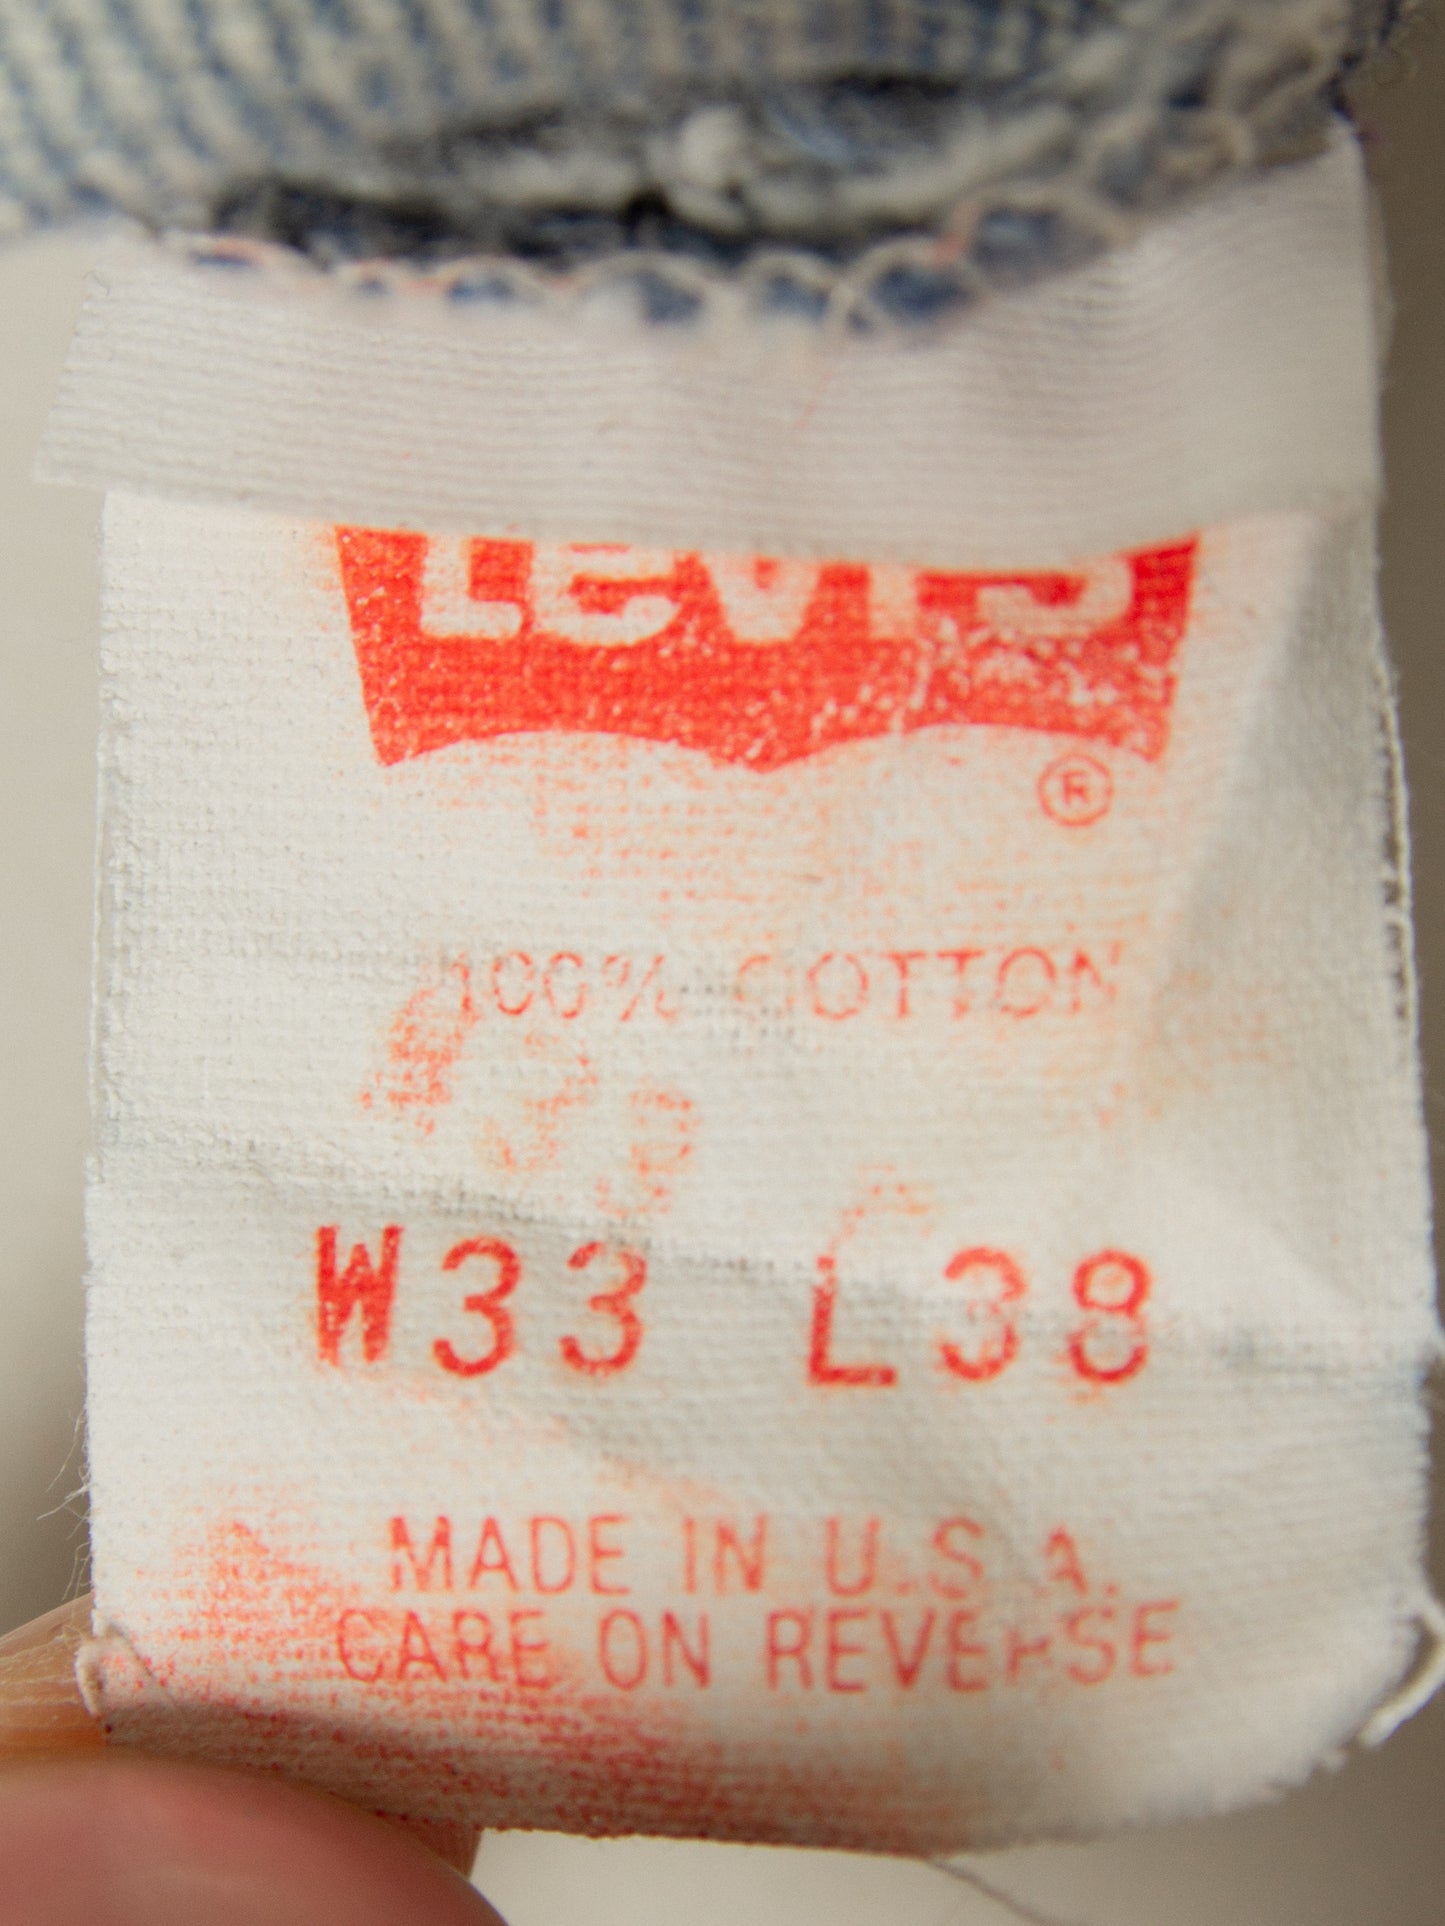 Vtg 1980s Levi's 501 - Made in USA (32x34)